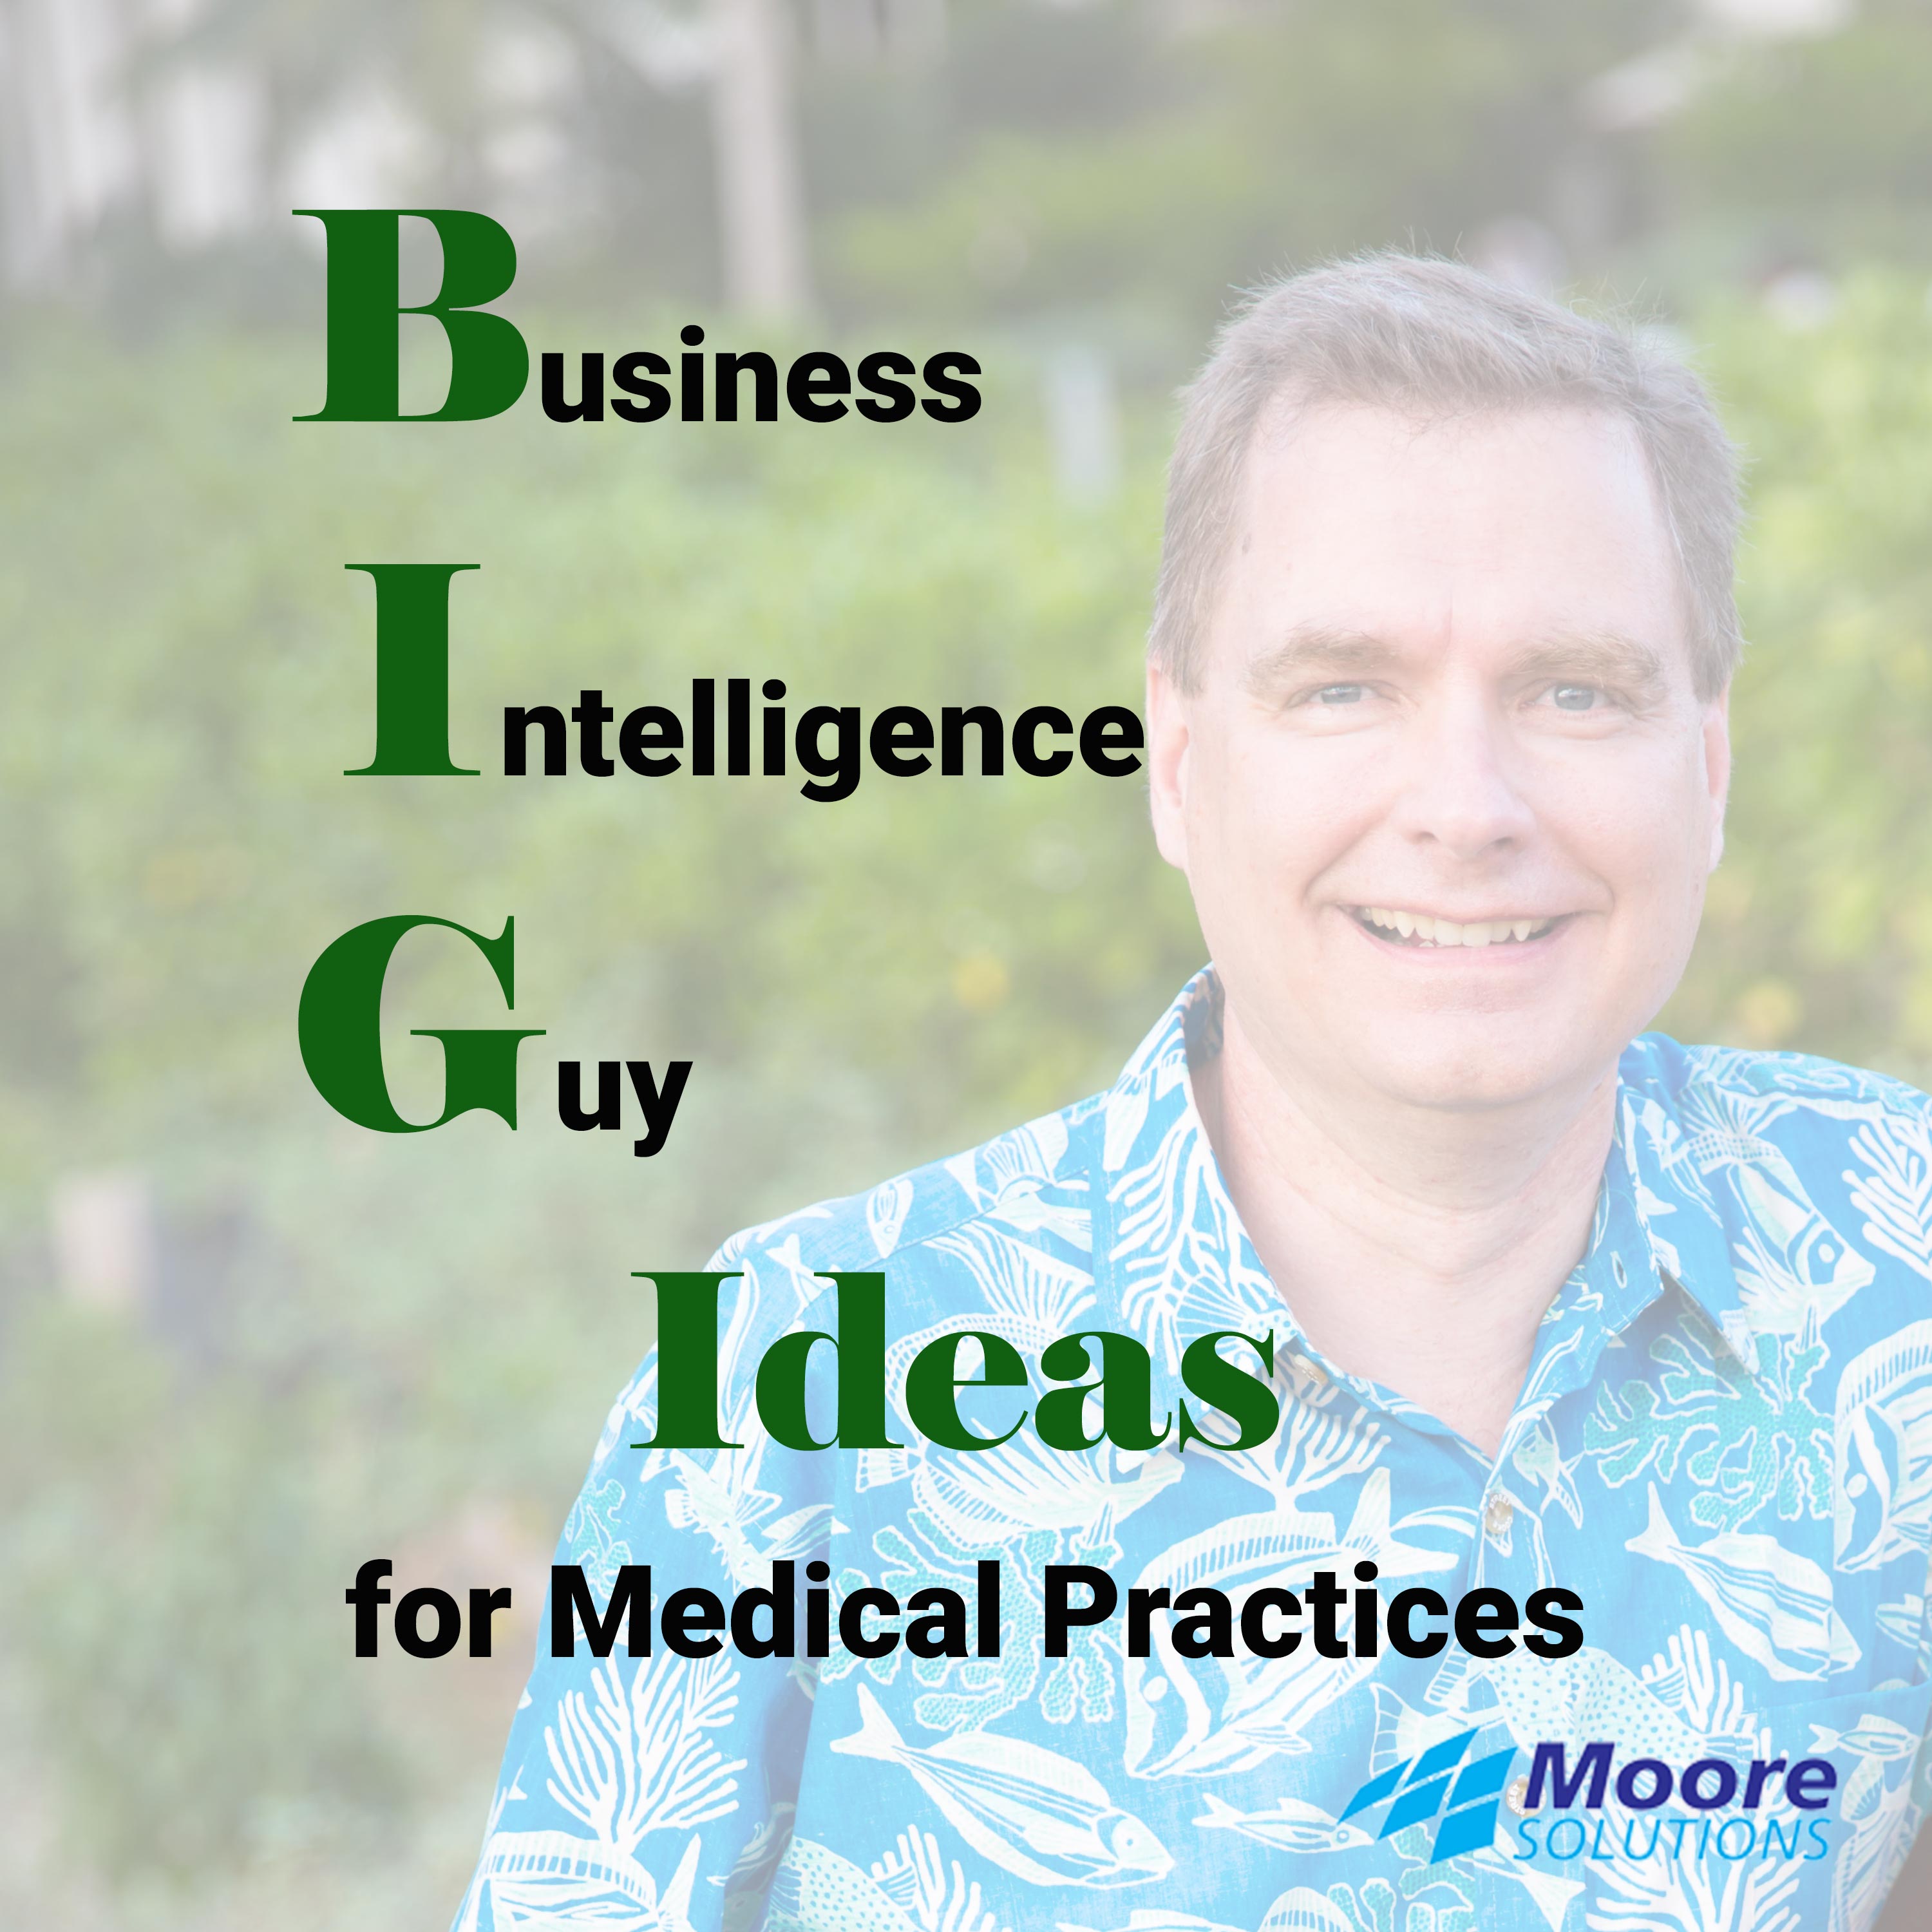 BIG Ideas from The Business Intelligence Guy